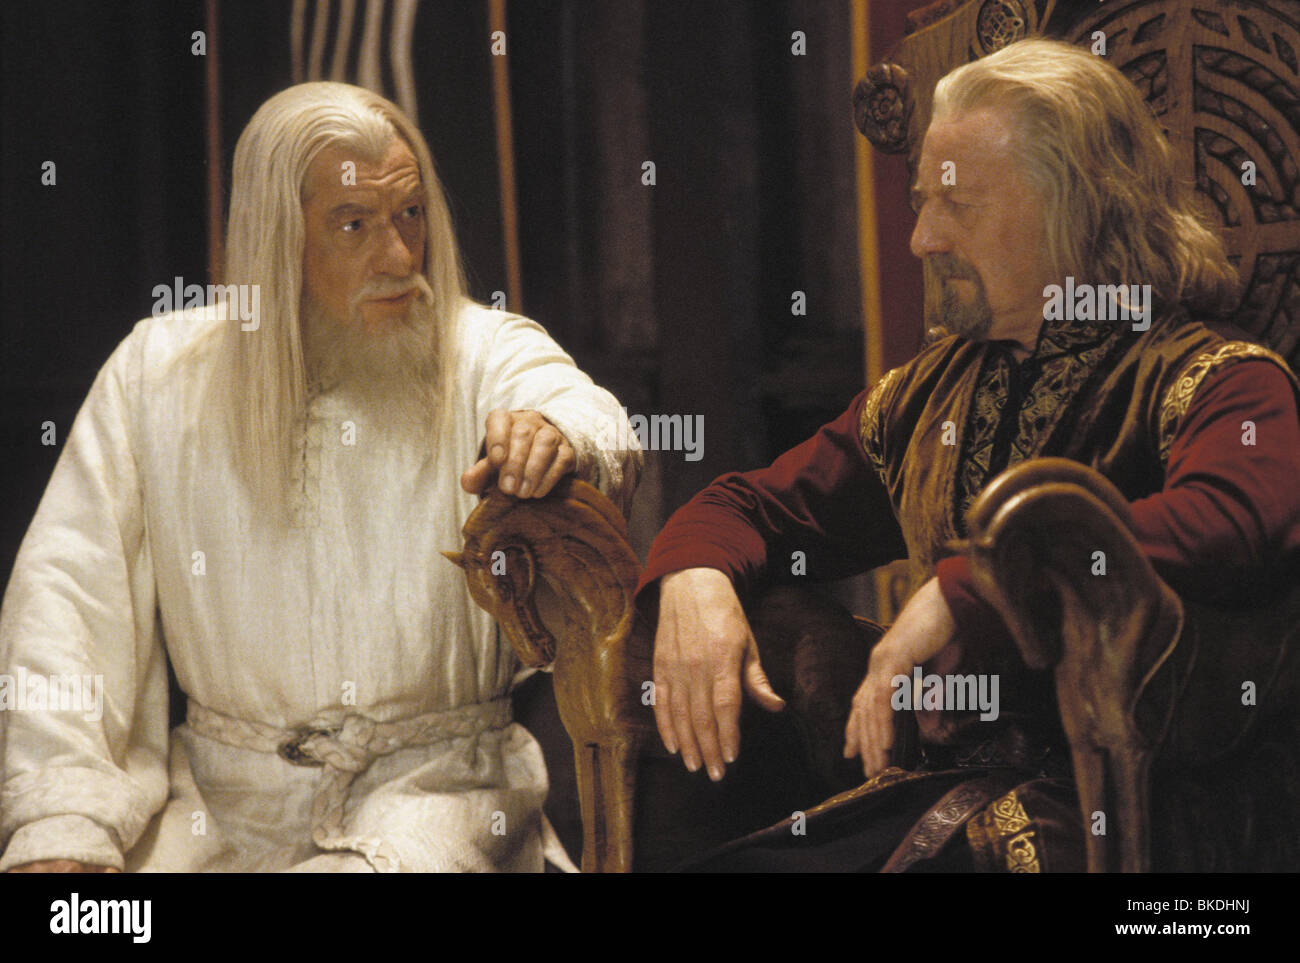 THE LORD OF THE RINGS: THE TWO TOWERS (2002) IAN McKELLEN, GANDALF, BERNARD HILL, THEODEN TWRS 002 713 Stock Photo